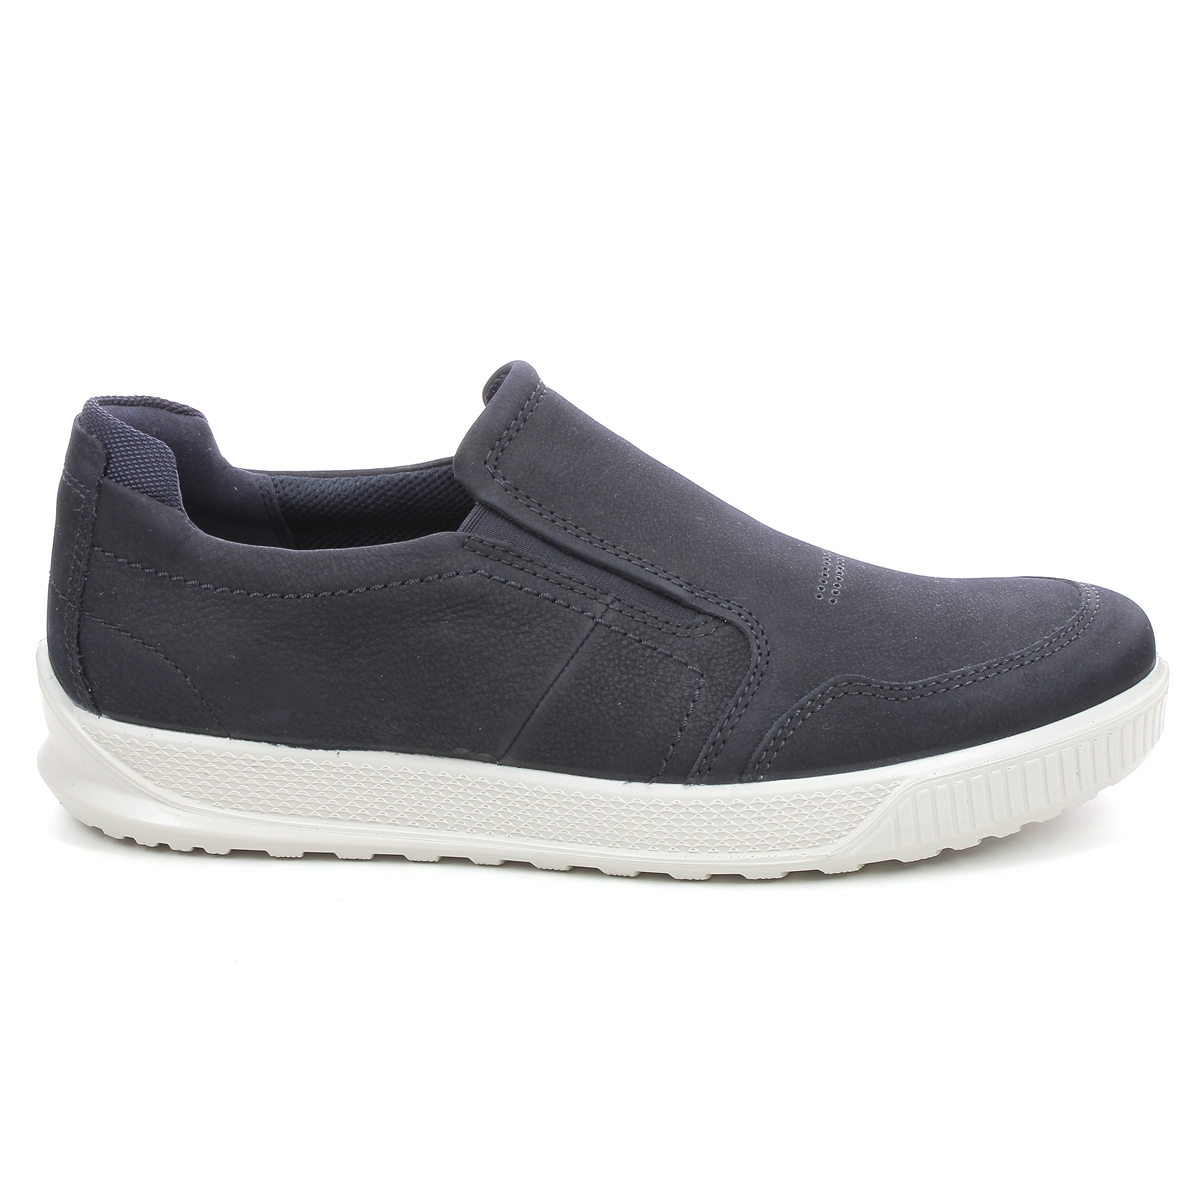 ECCO Byway Slip Navy leather Mens Slip-on Shoes 501614-50769